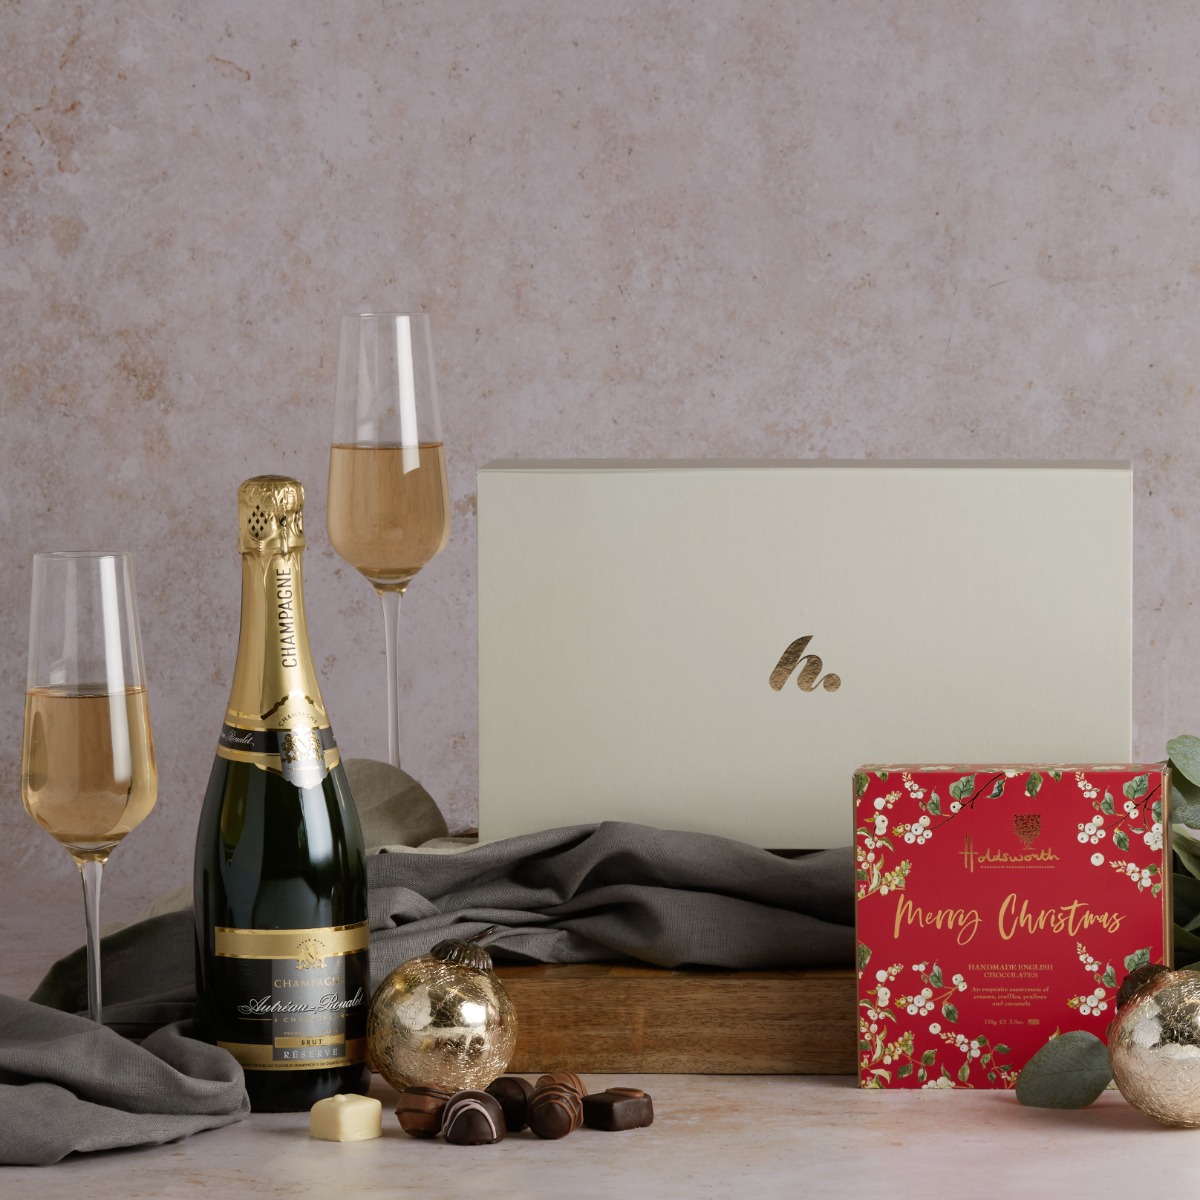  Champagne & Christmas Chocolates with poured flutes of fizz and the contents of this hamper on display